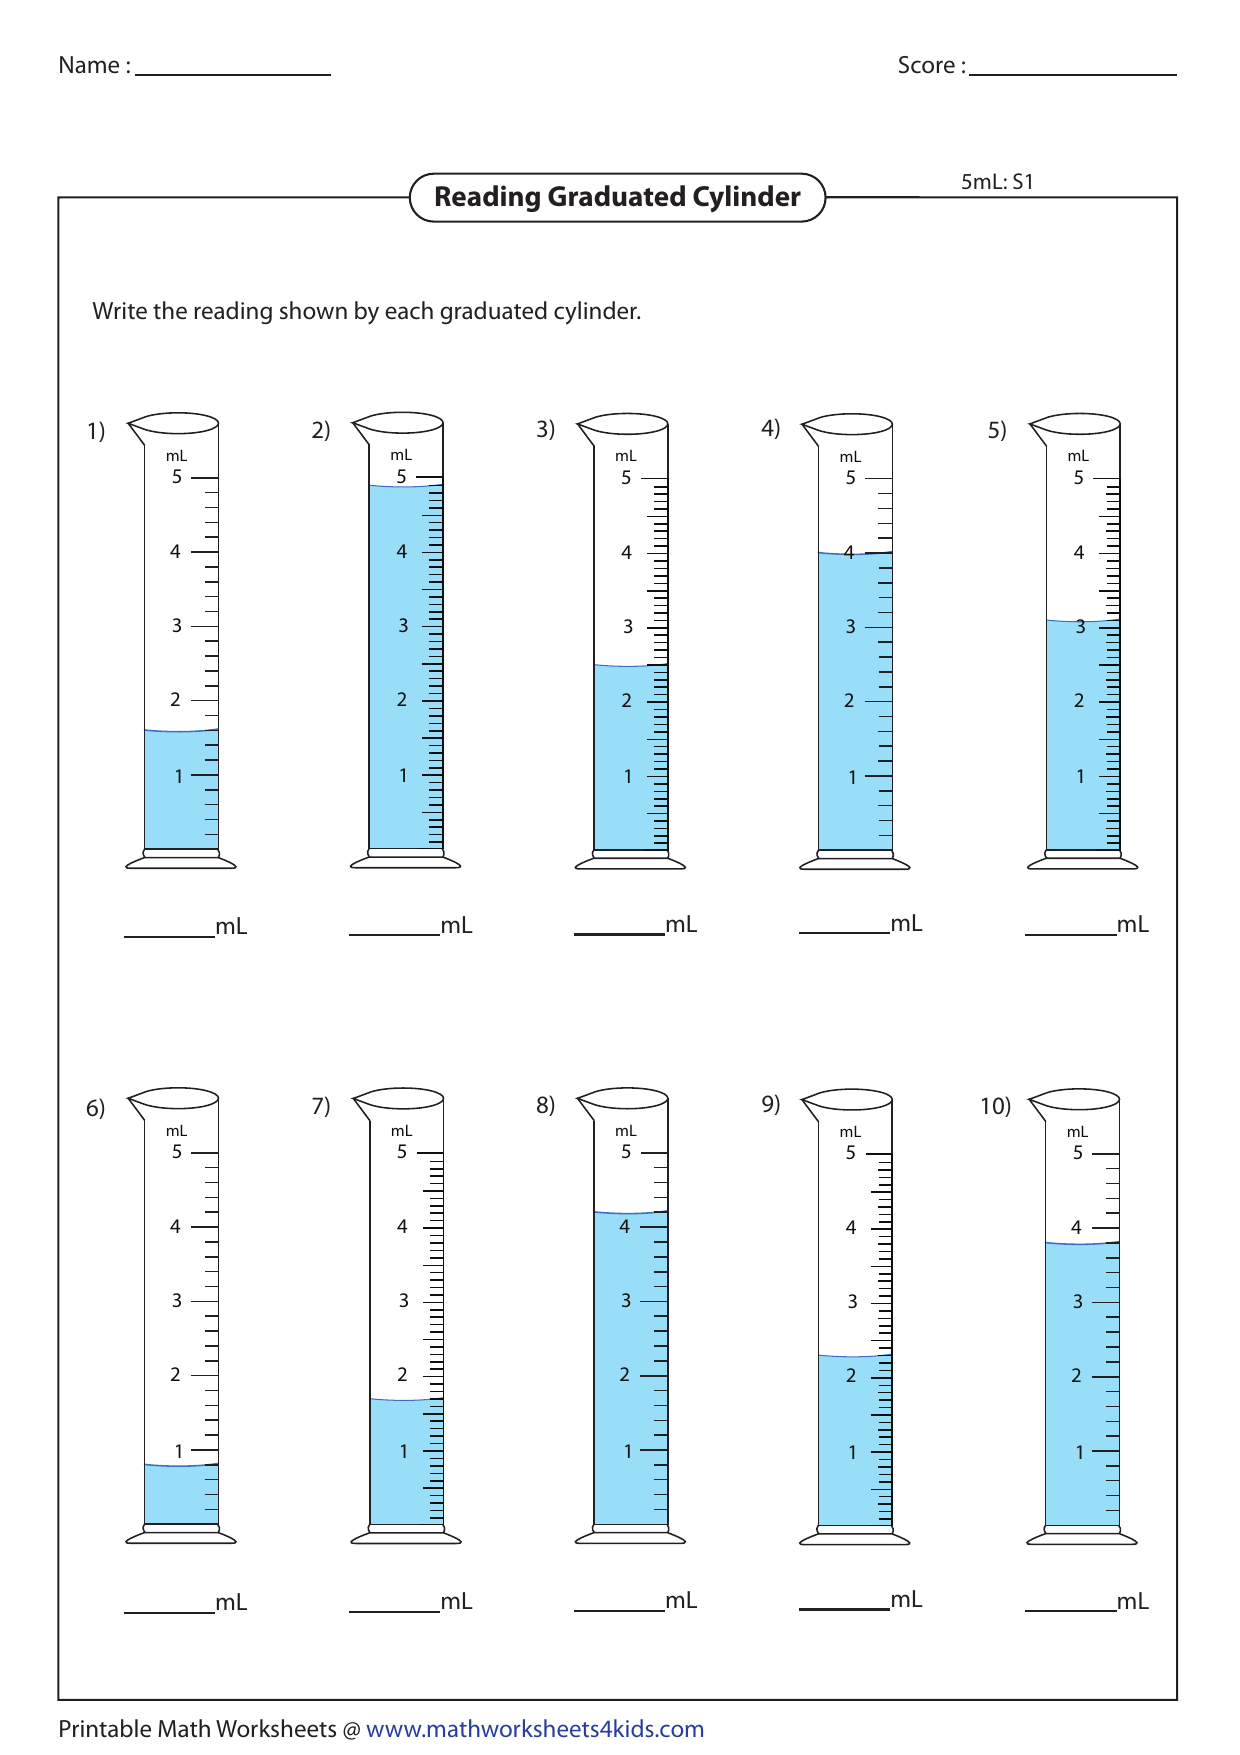 20 ml graduated cylinder ws only In Reading A Graduated Cylinder Worksheet